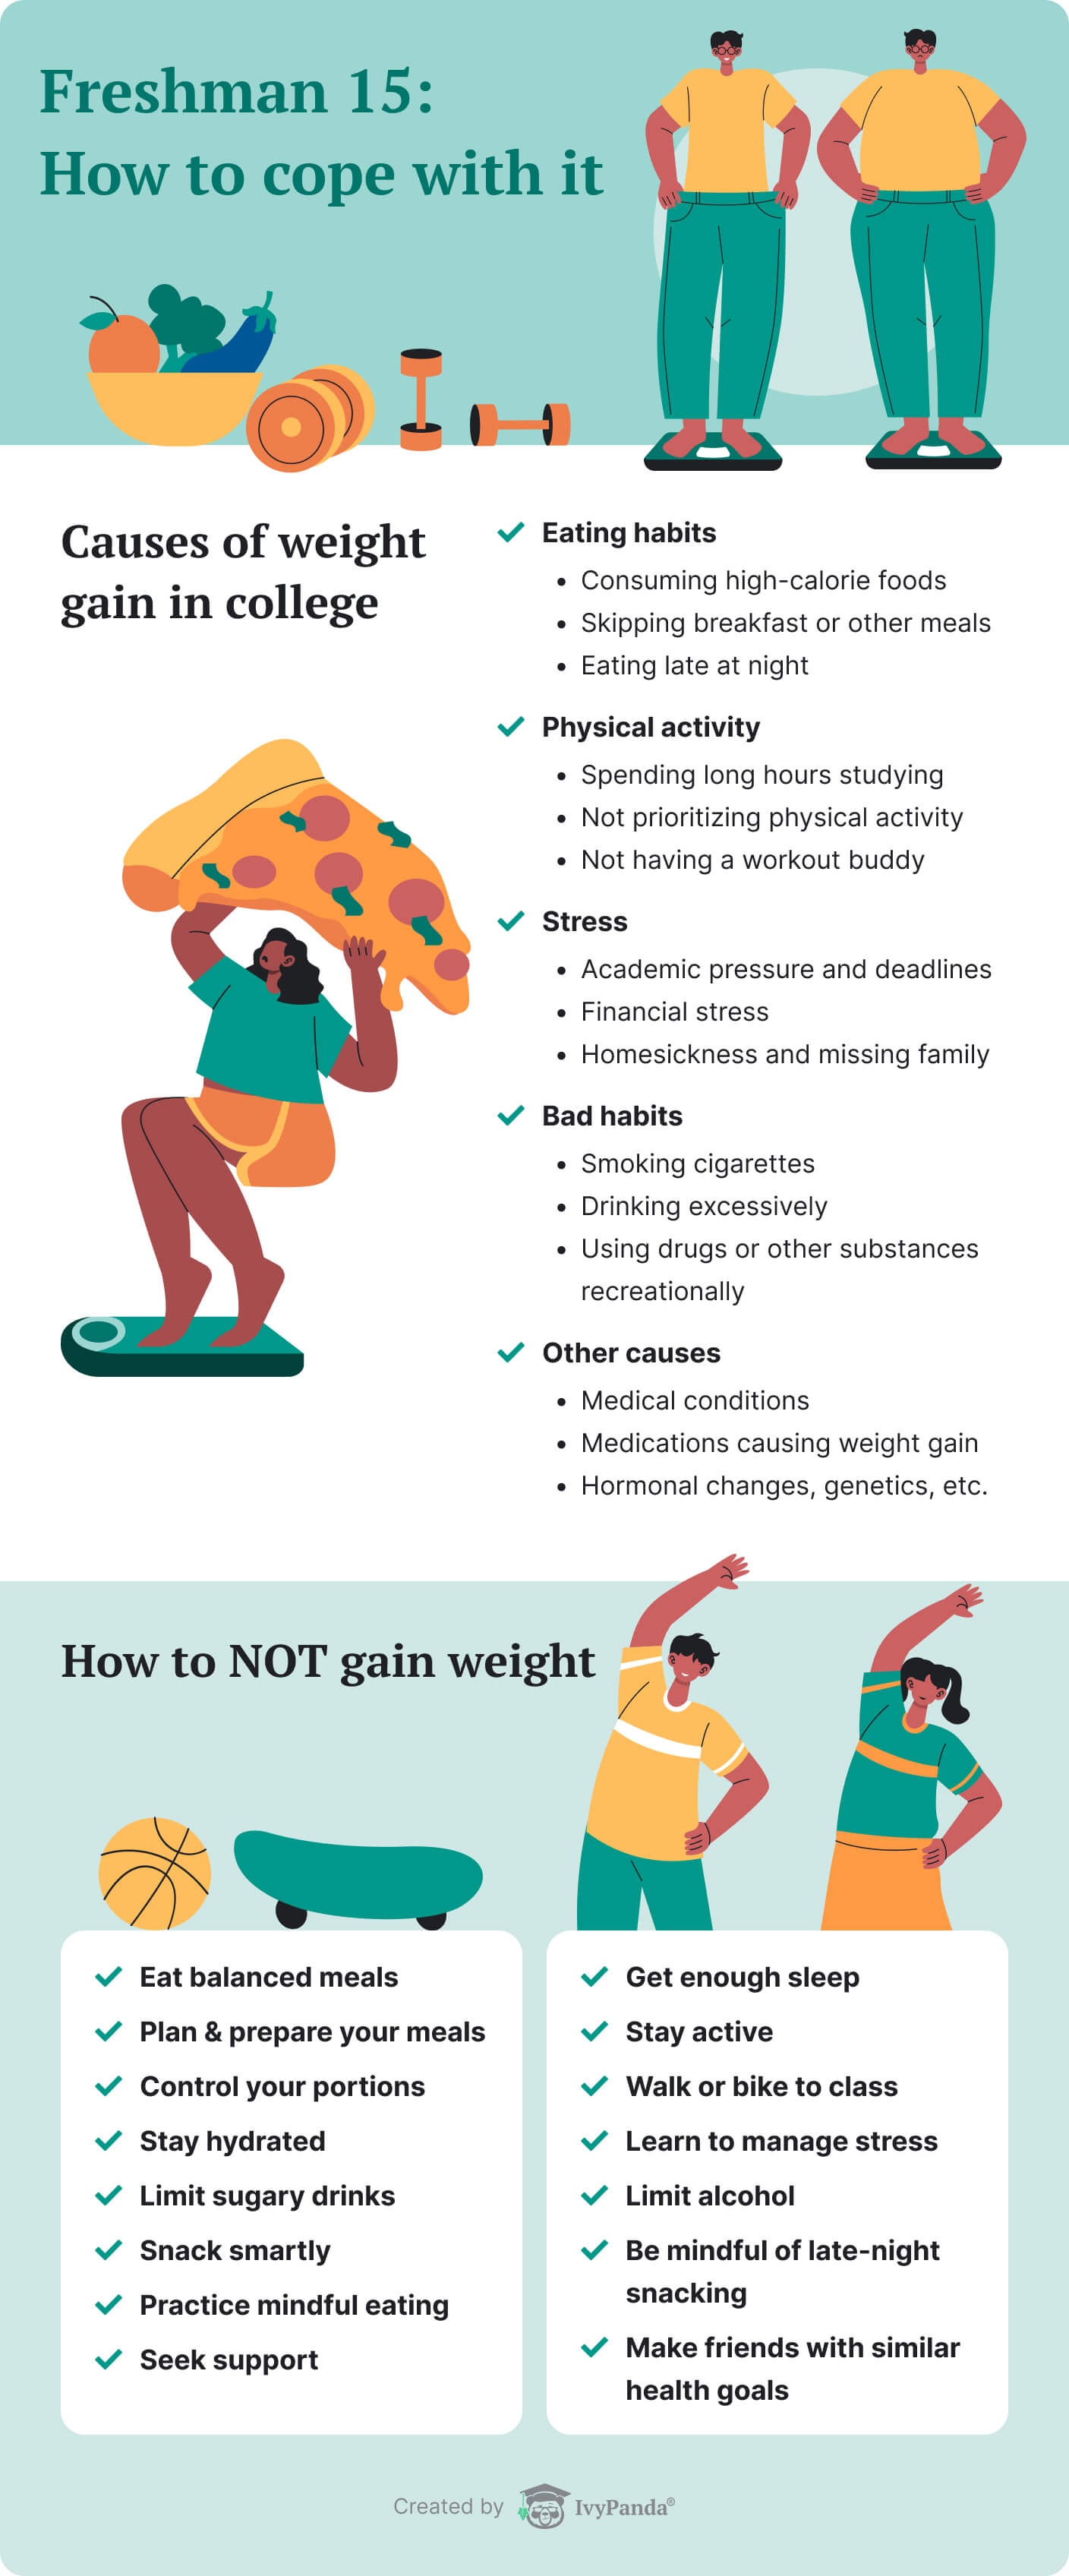 This image shows the causes of college weight gain and ways to prevent it.